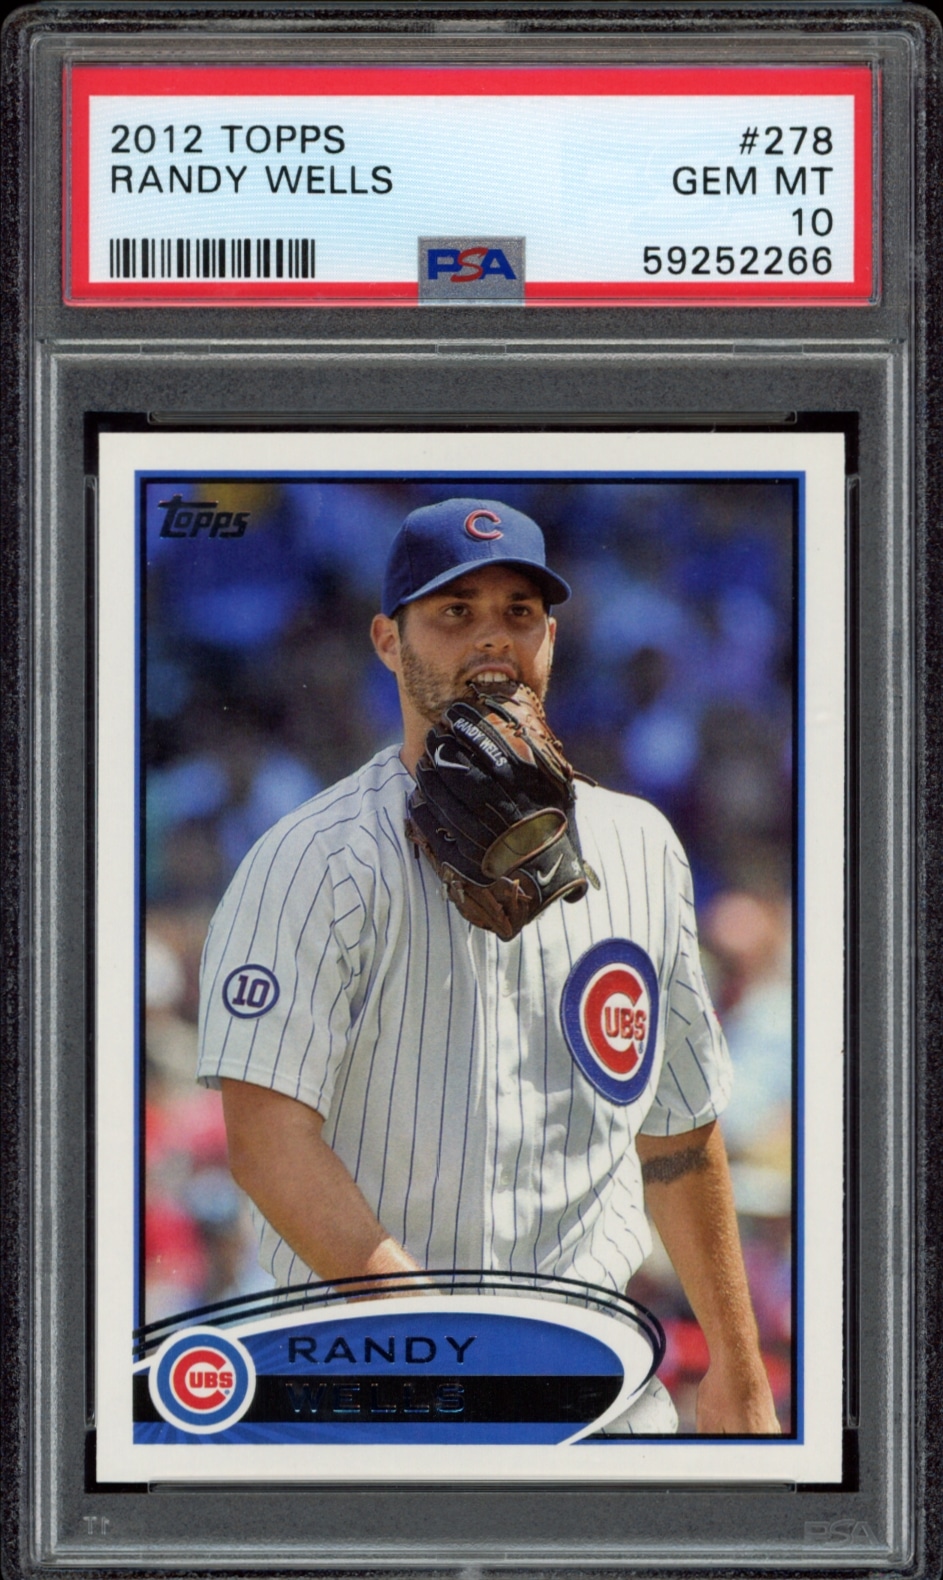 Randy Wells pitching in 2012 Topps card #278, graded GEM MT 10 by PSA.